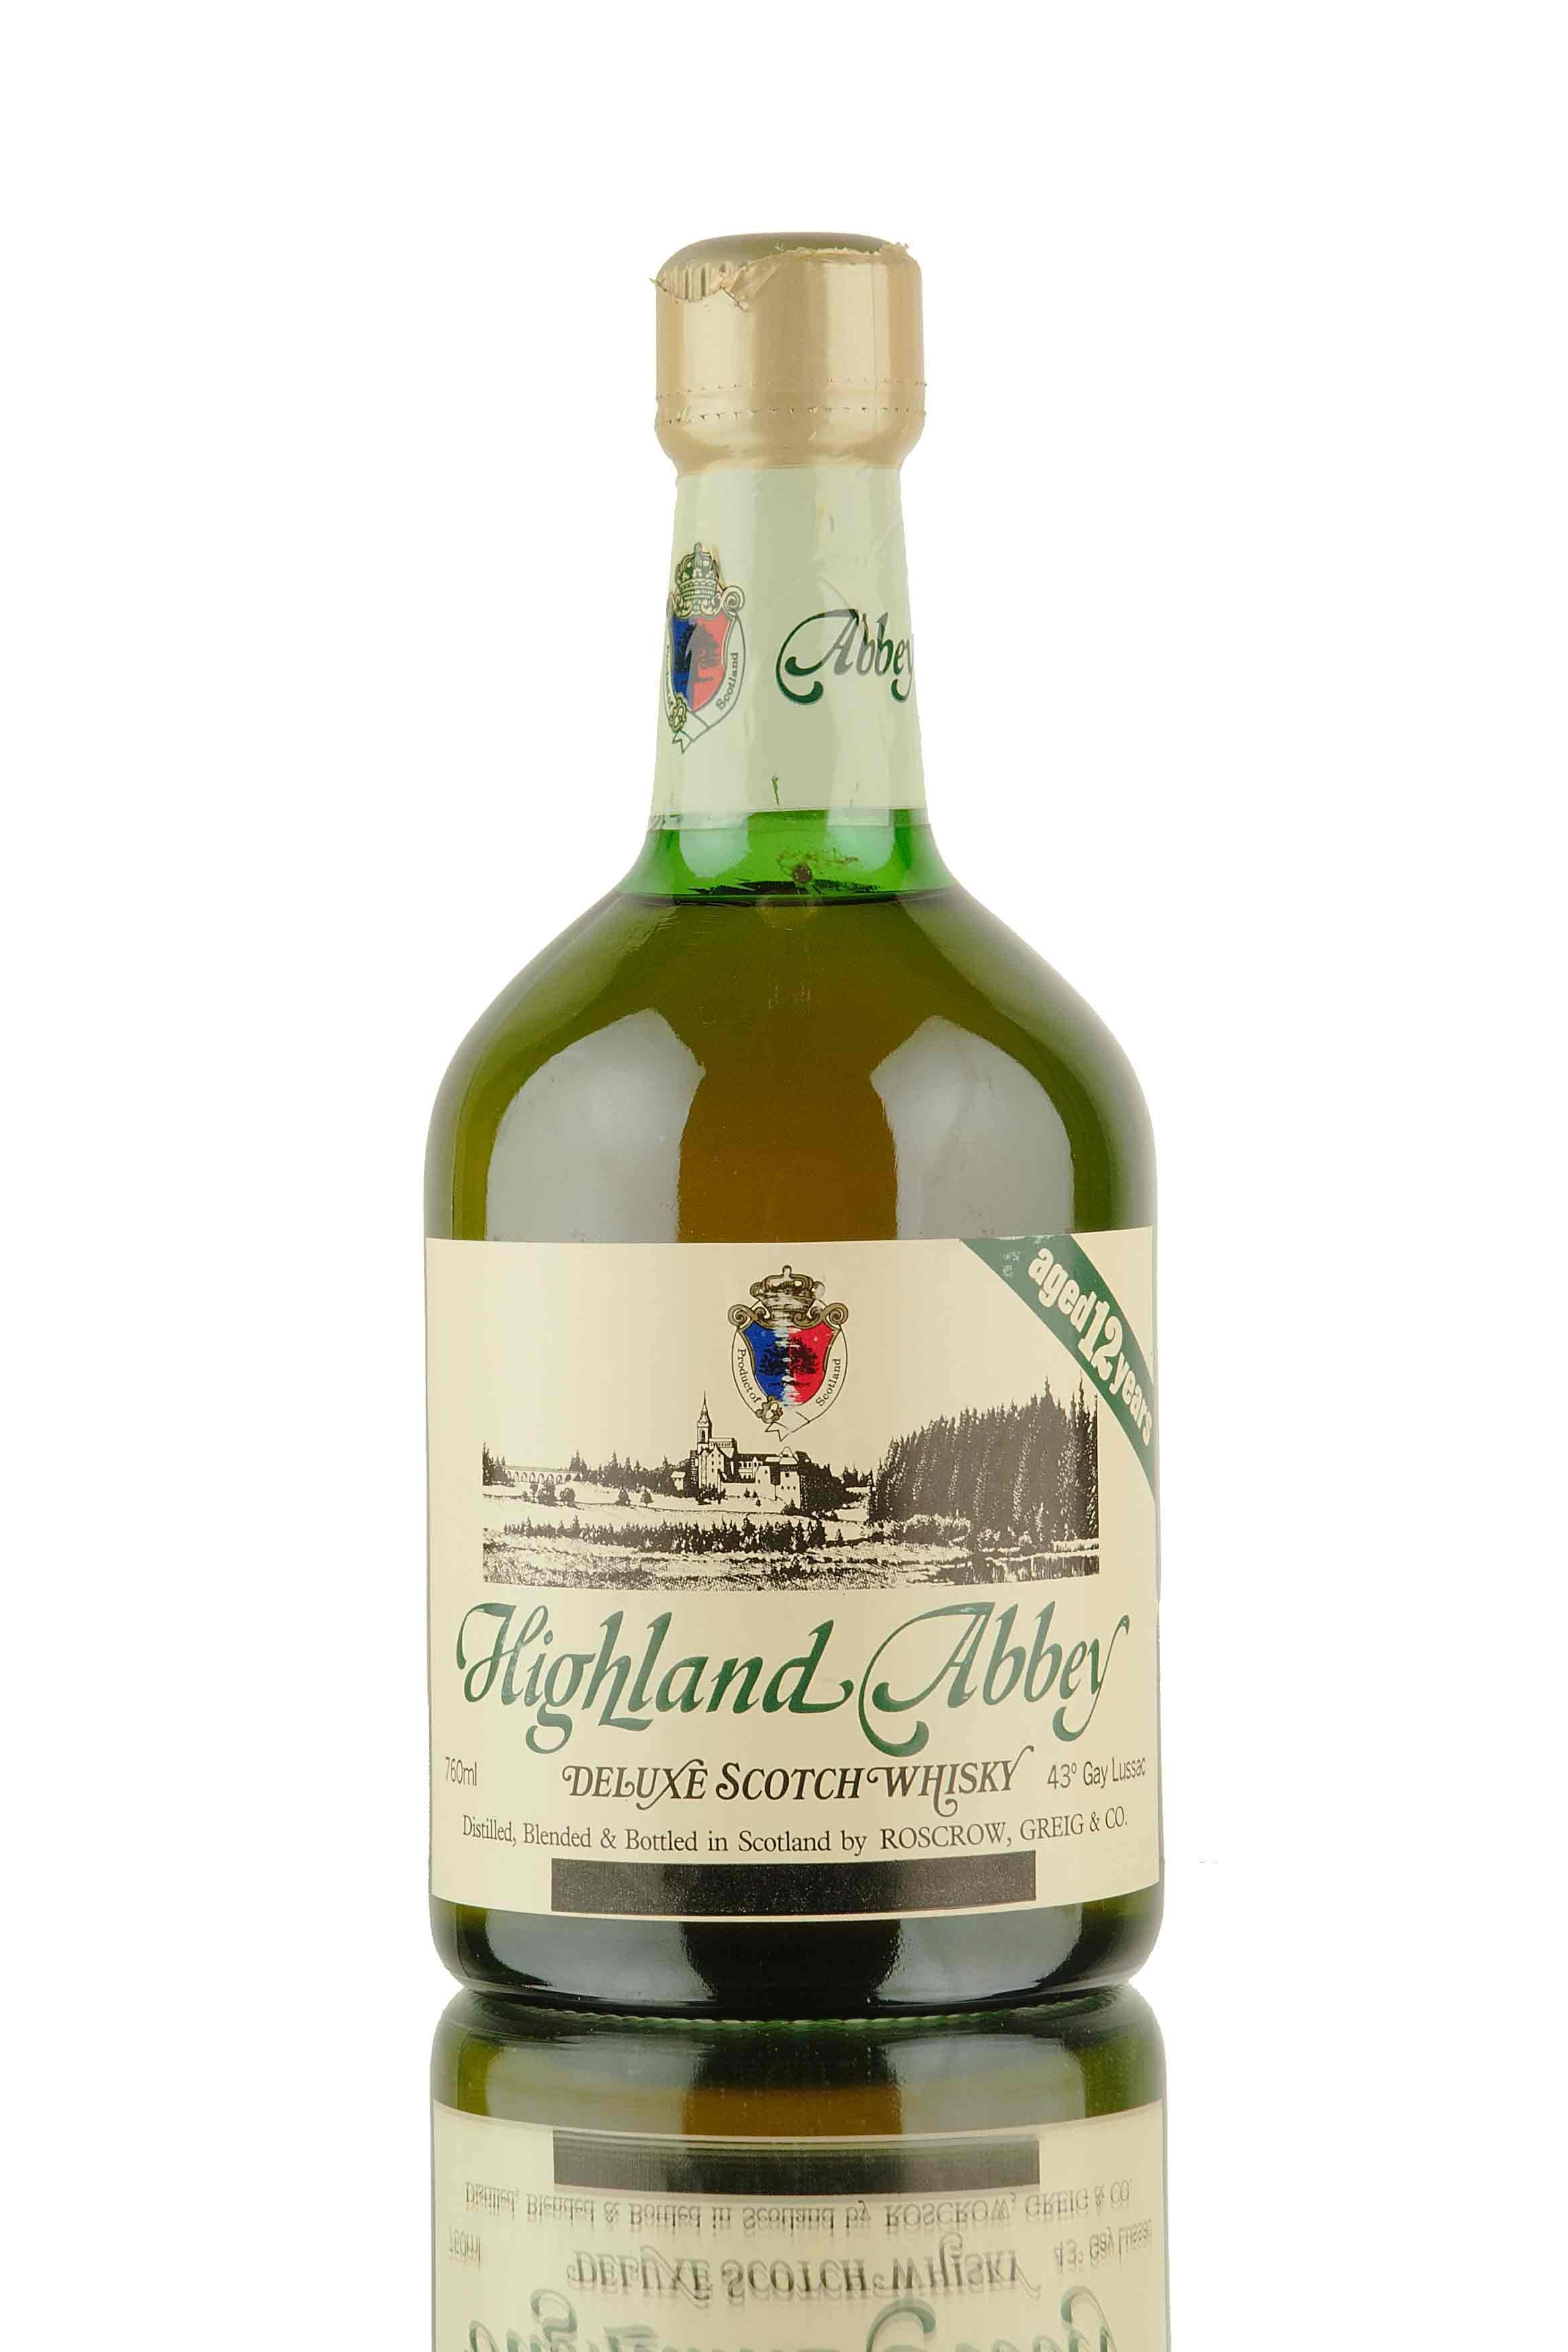 Highland Abbey 12 Year Old Deluxe Scotch Whisky